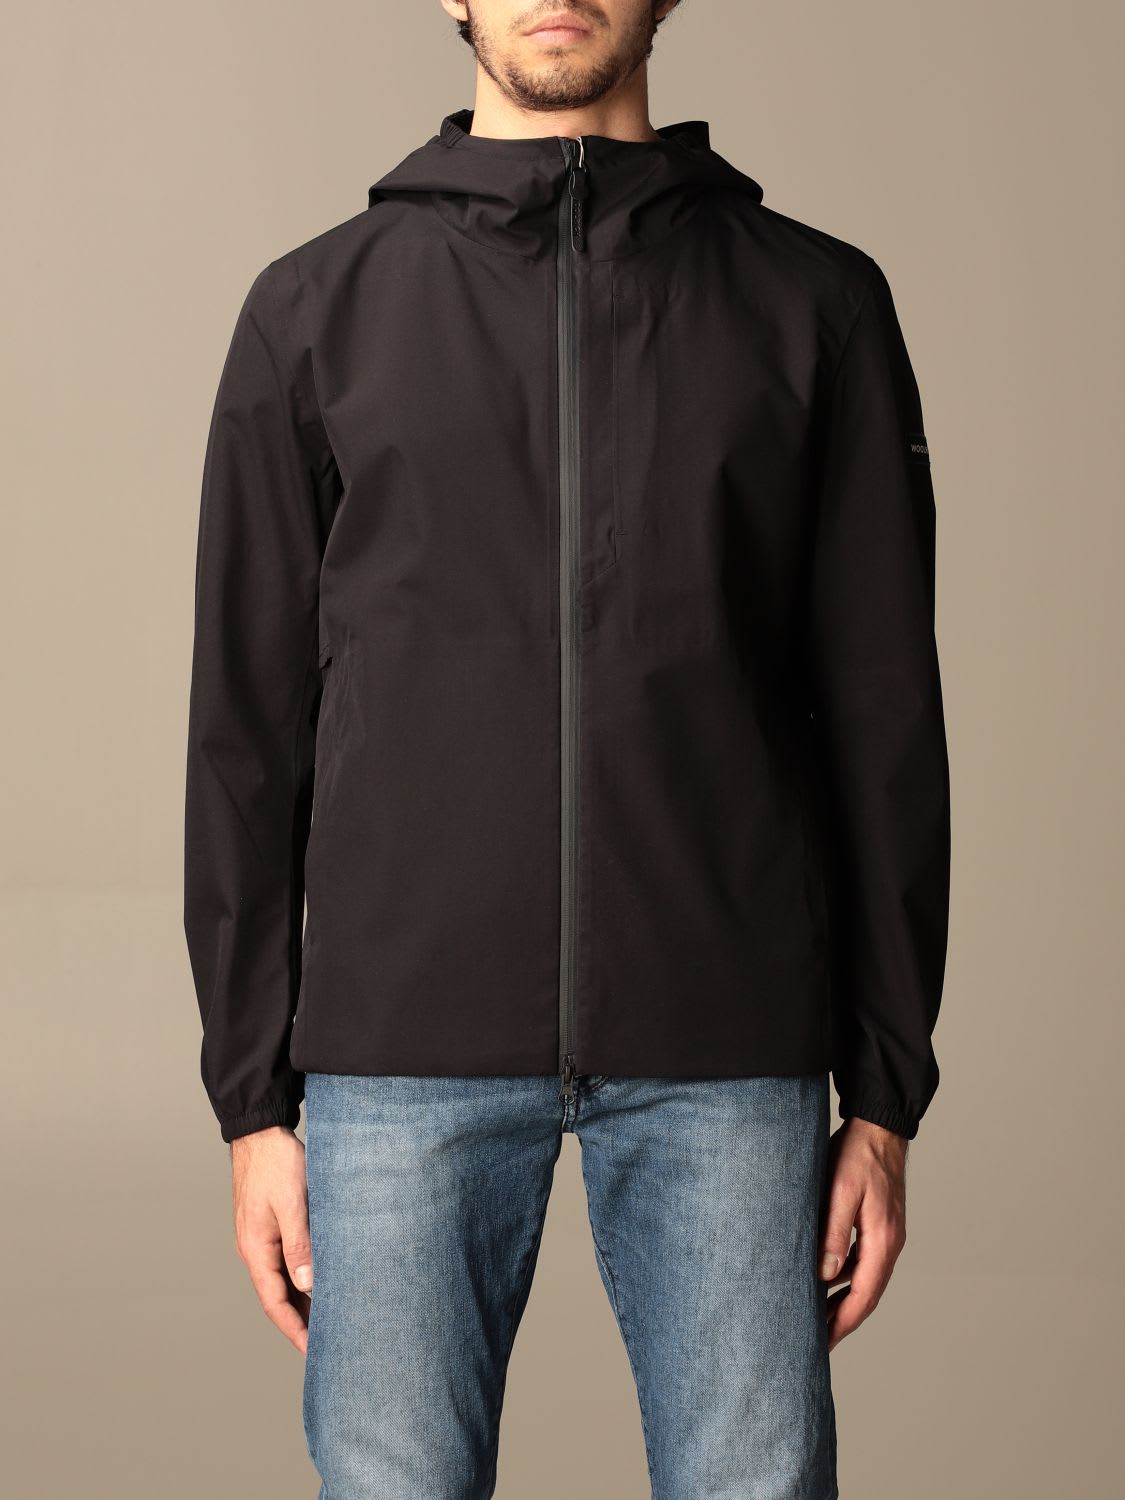 Woolrich Jacket Woolrich Bomber In Technical Fabric